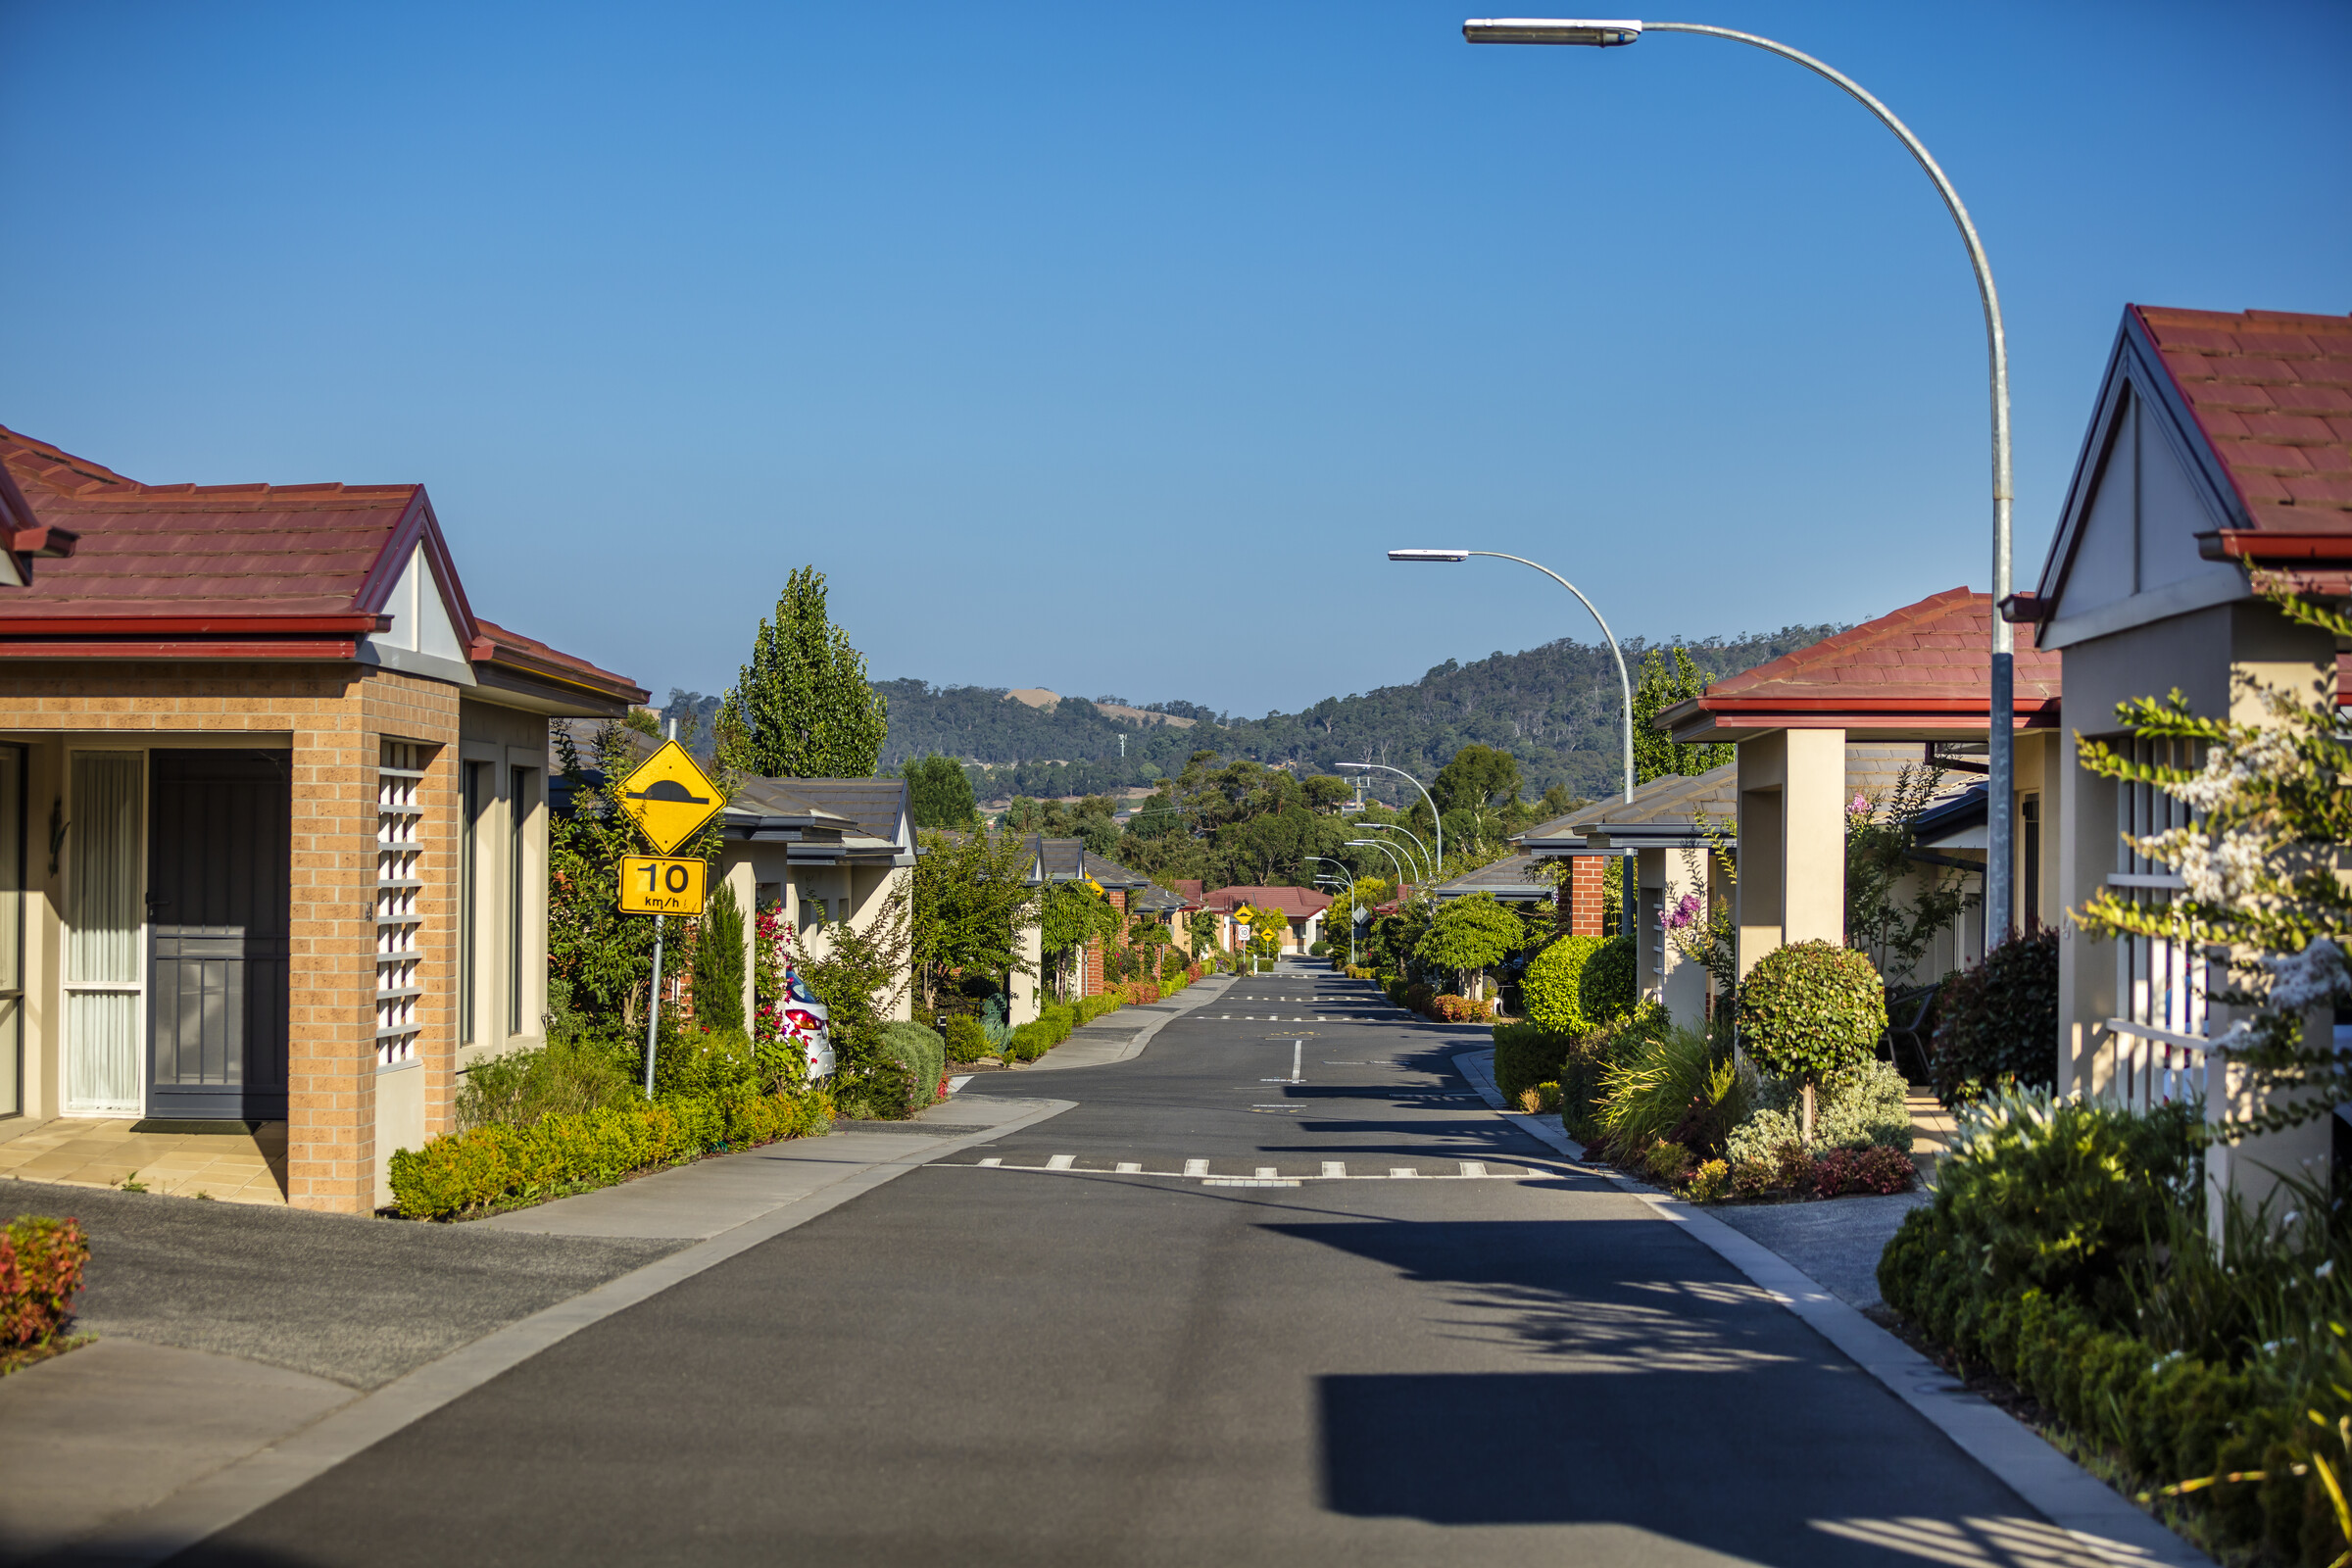 Waverley Country Club village roadway lined with homes, trees, gardens and lamp posts, hills in the distance